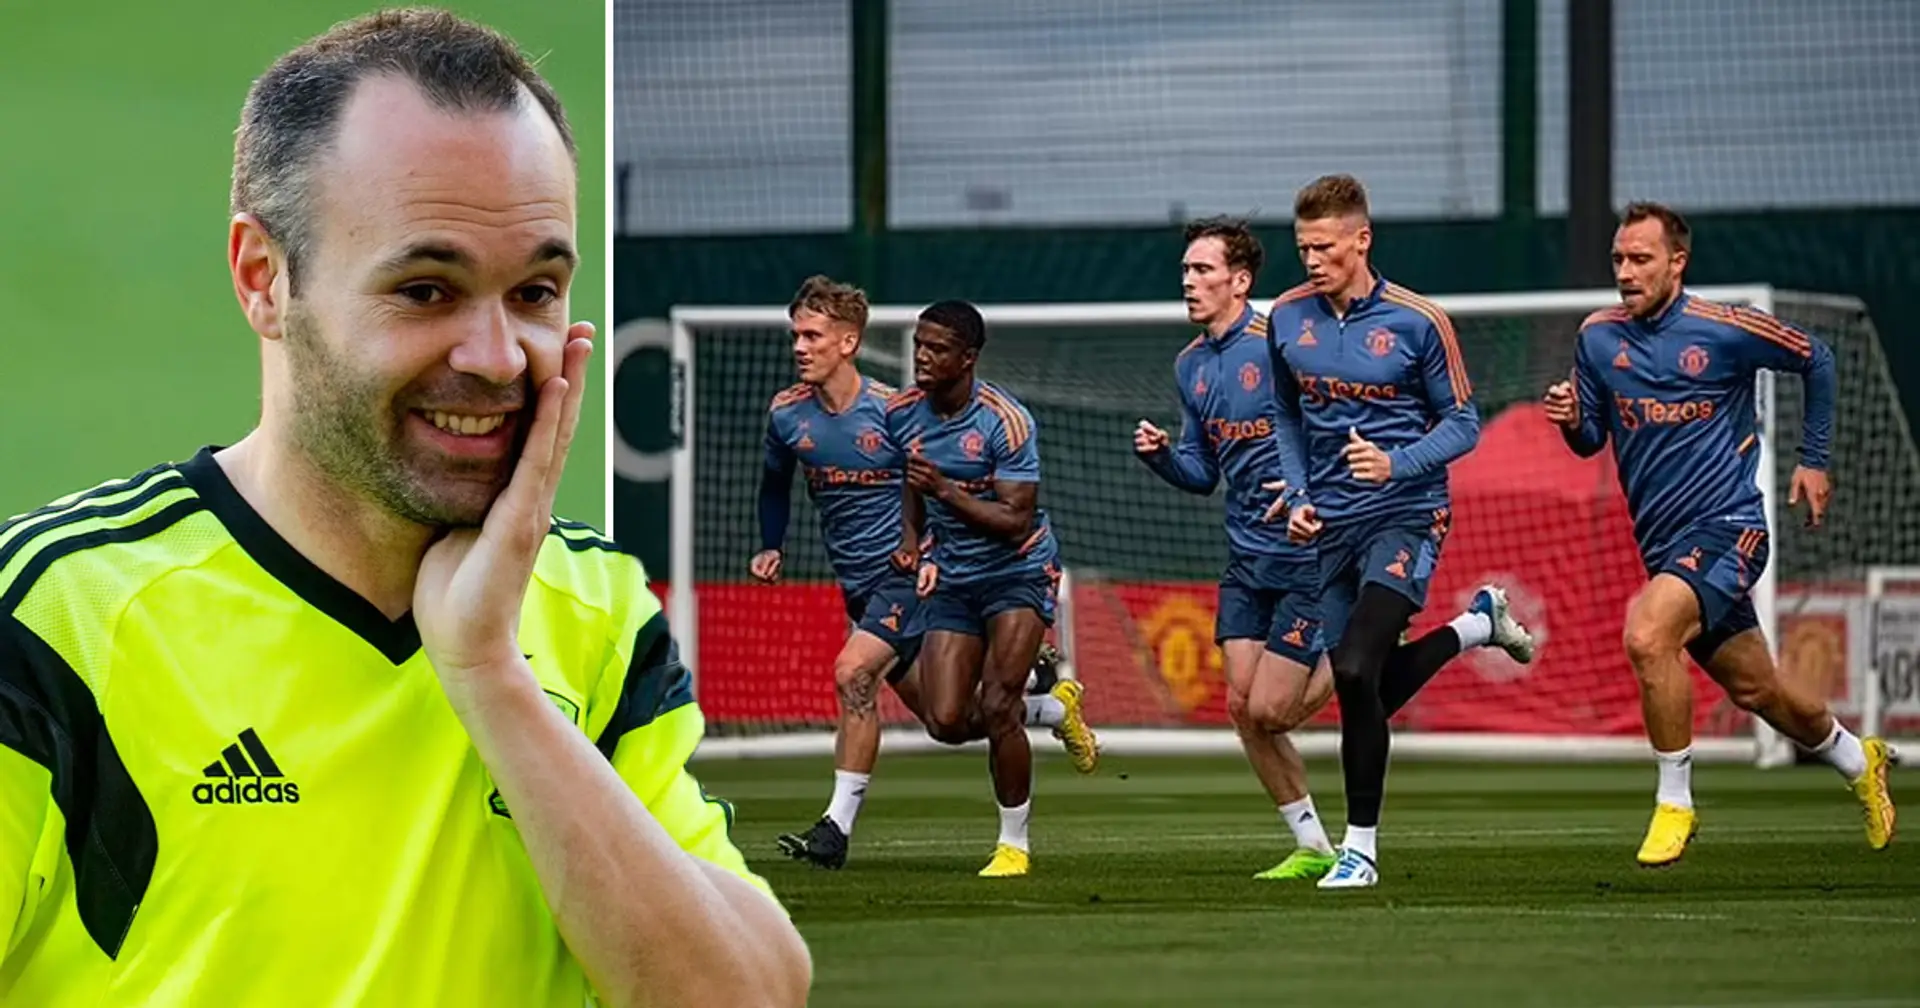 Lukaku, Lingard & more: 4 most ridiculous footballers compared to Andres Iniesta